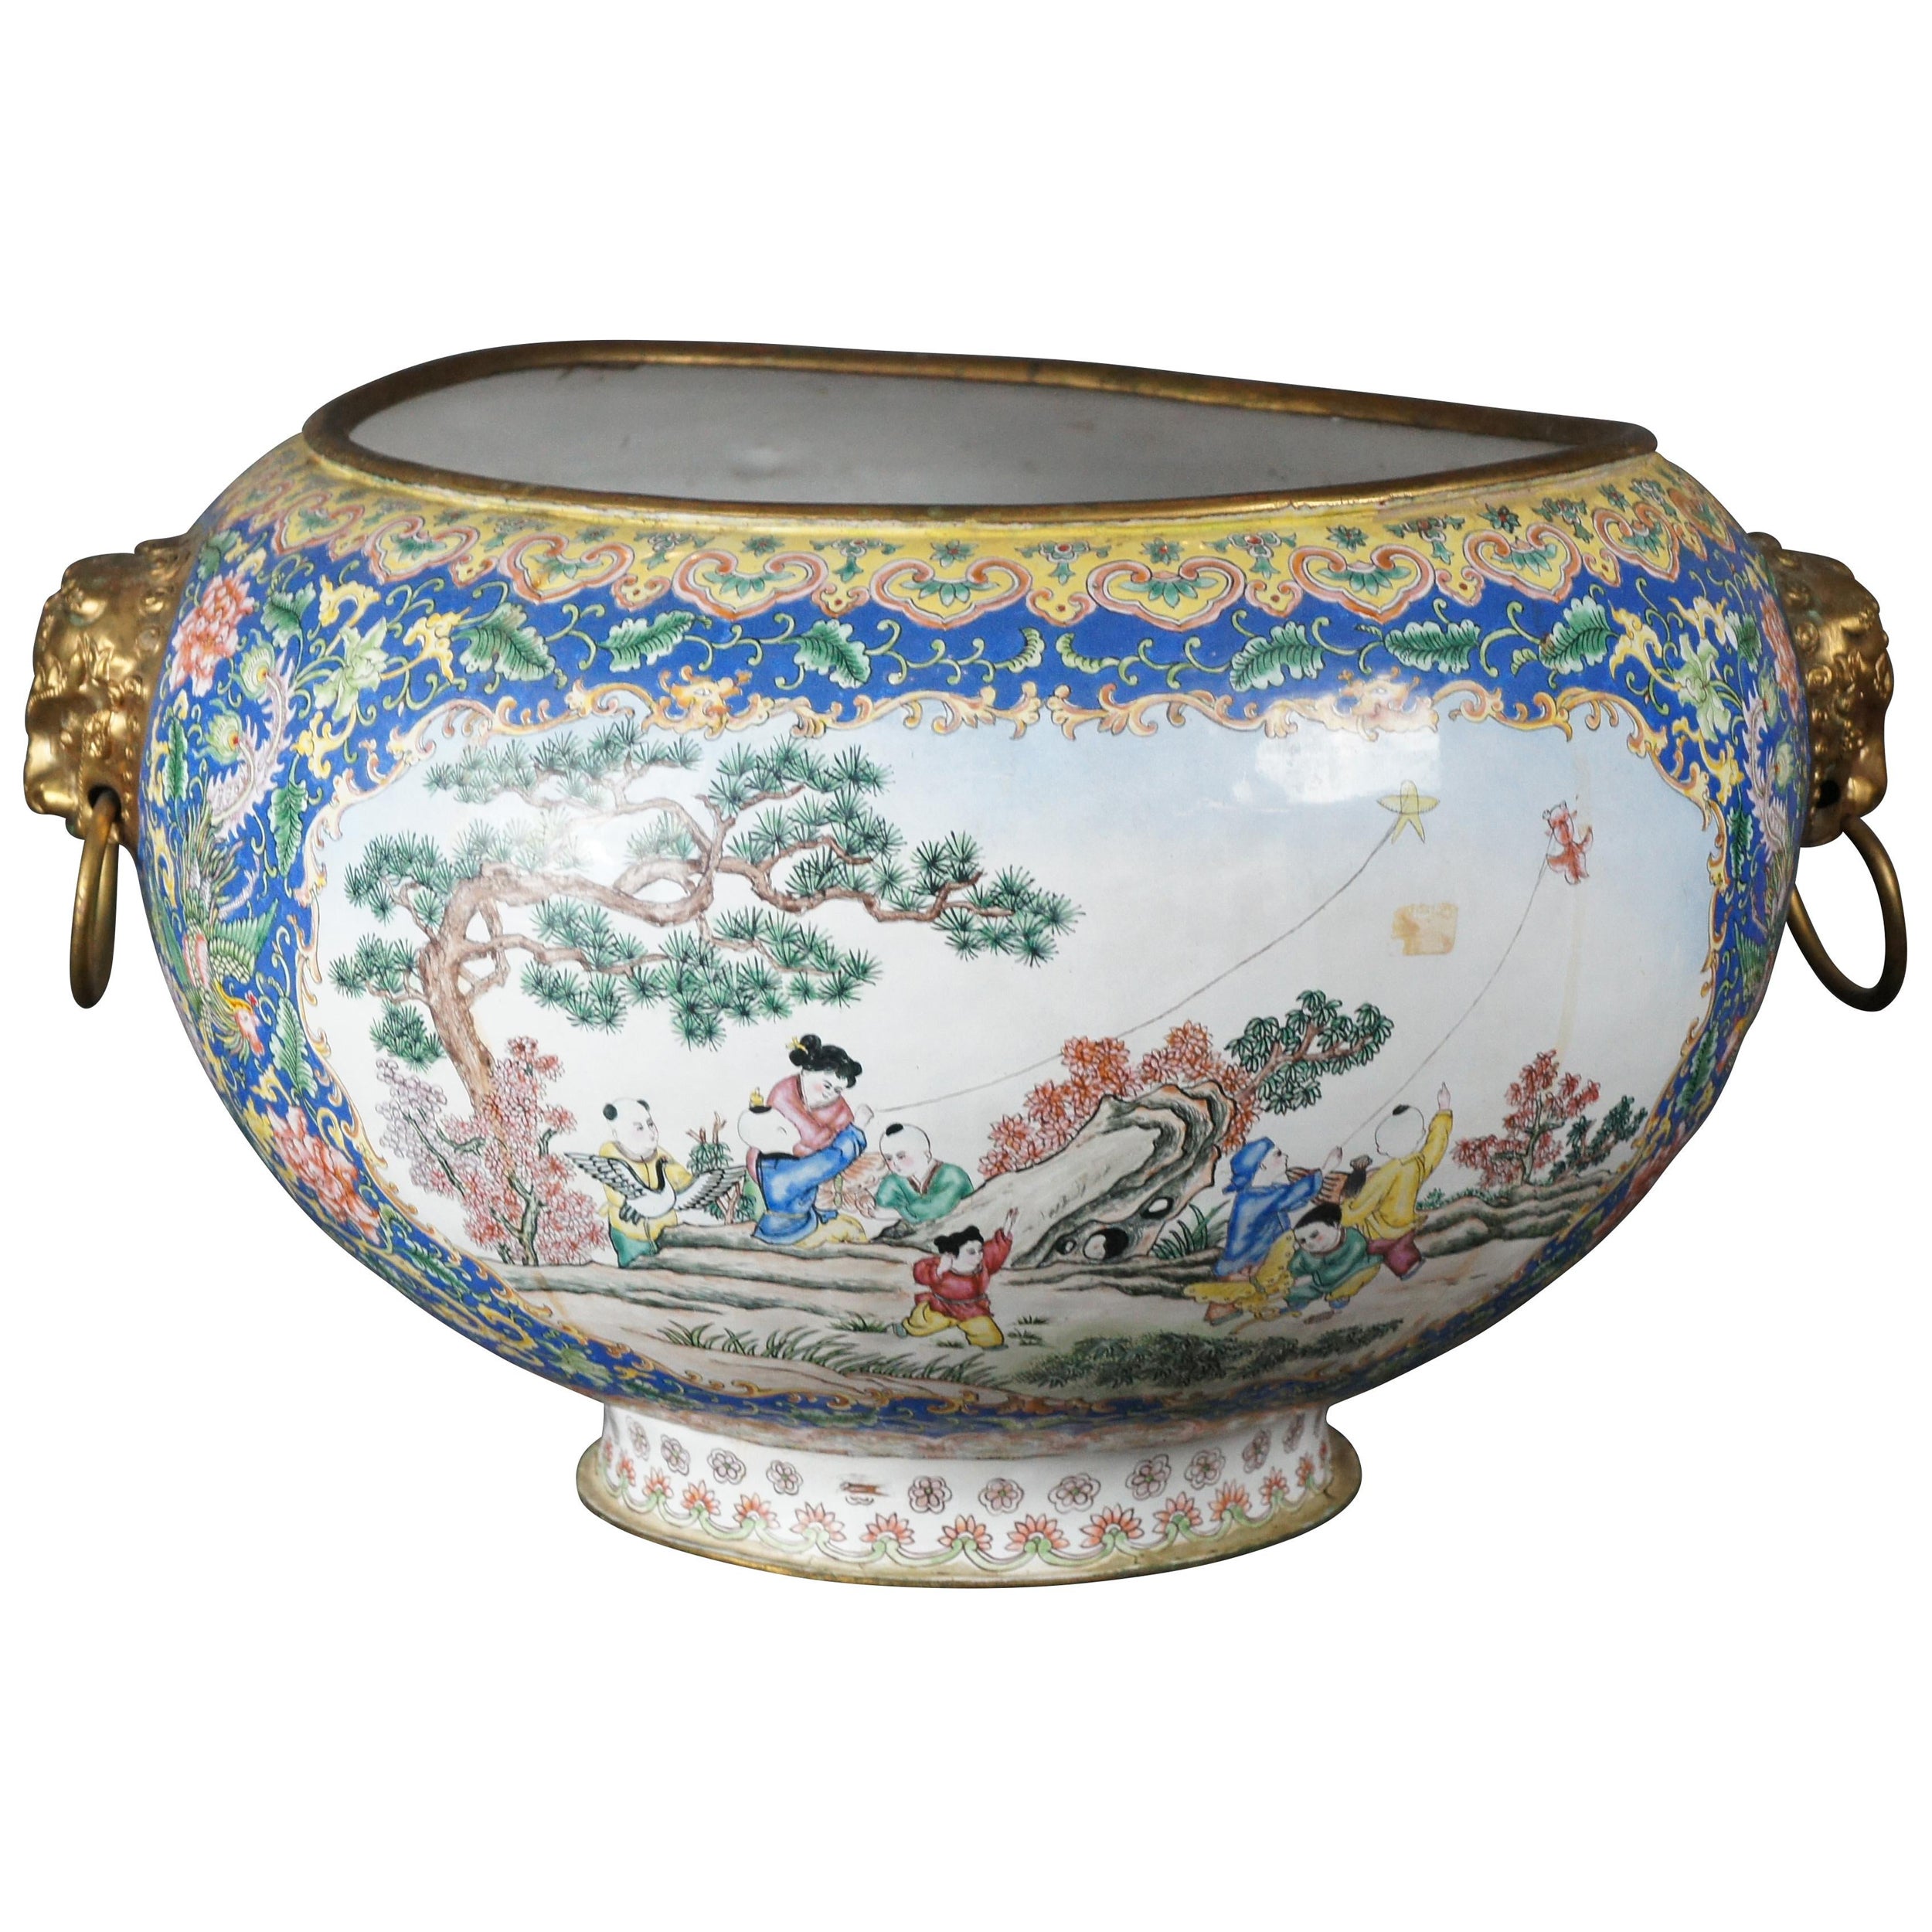 Antique Chinese Canton Enamel on Copper Jaridiniere Fish Bowl Gilt Metal Handles For Sale